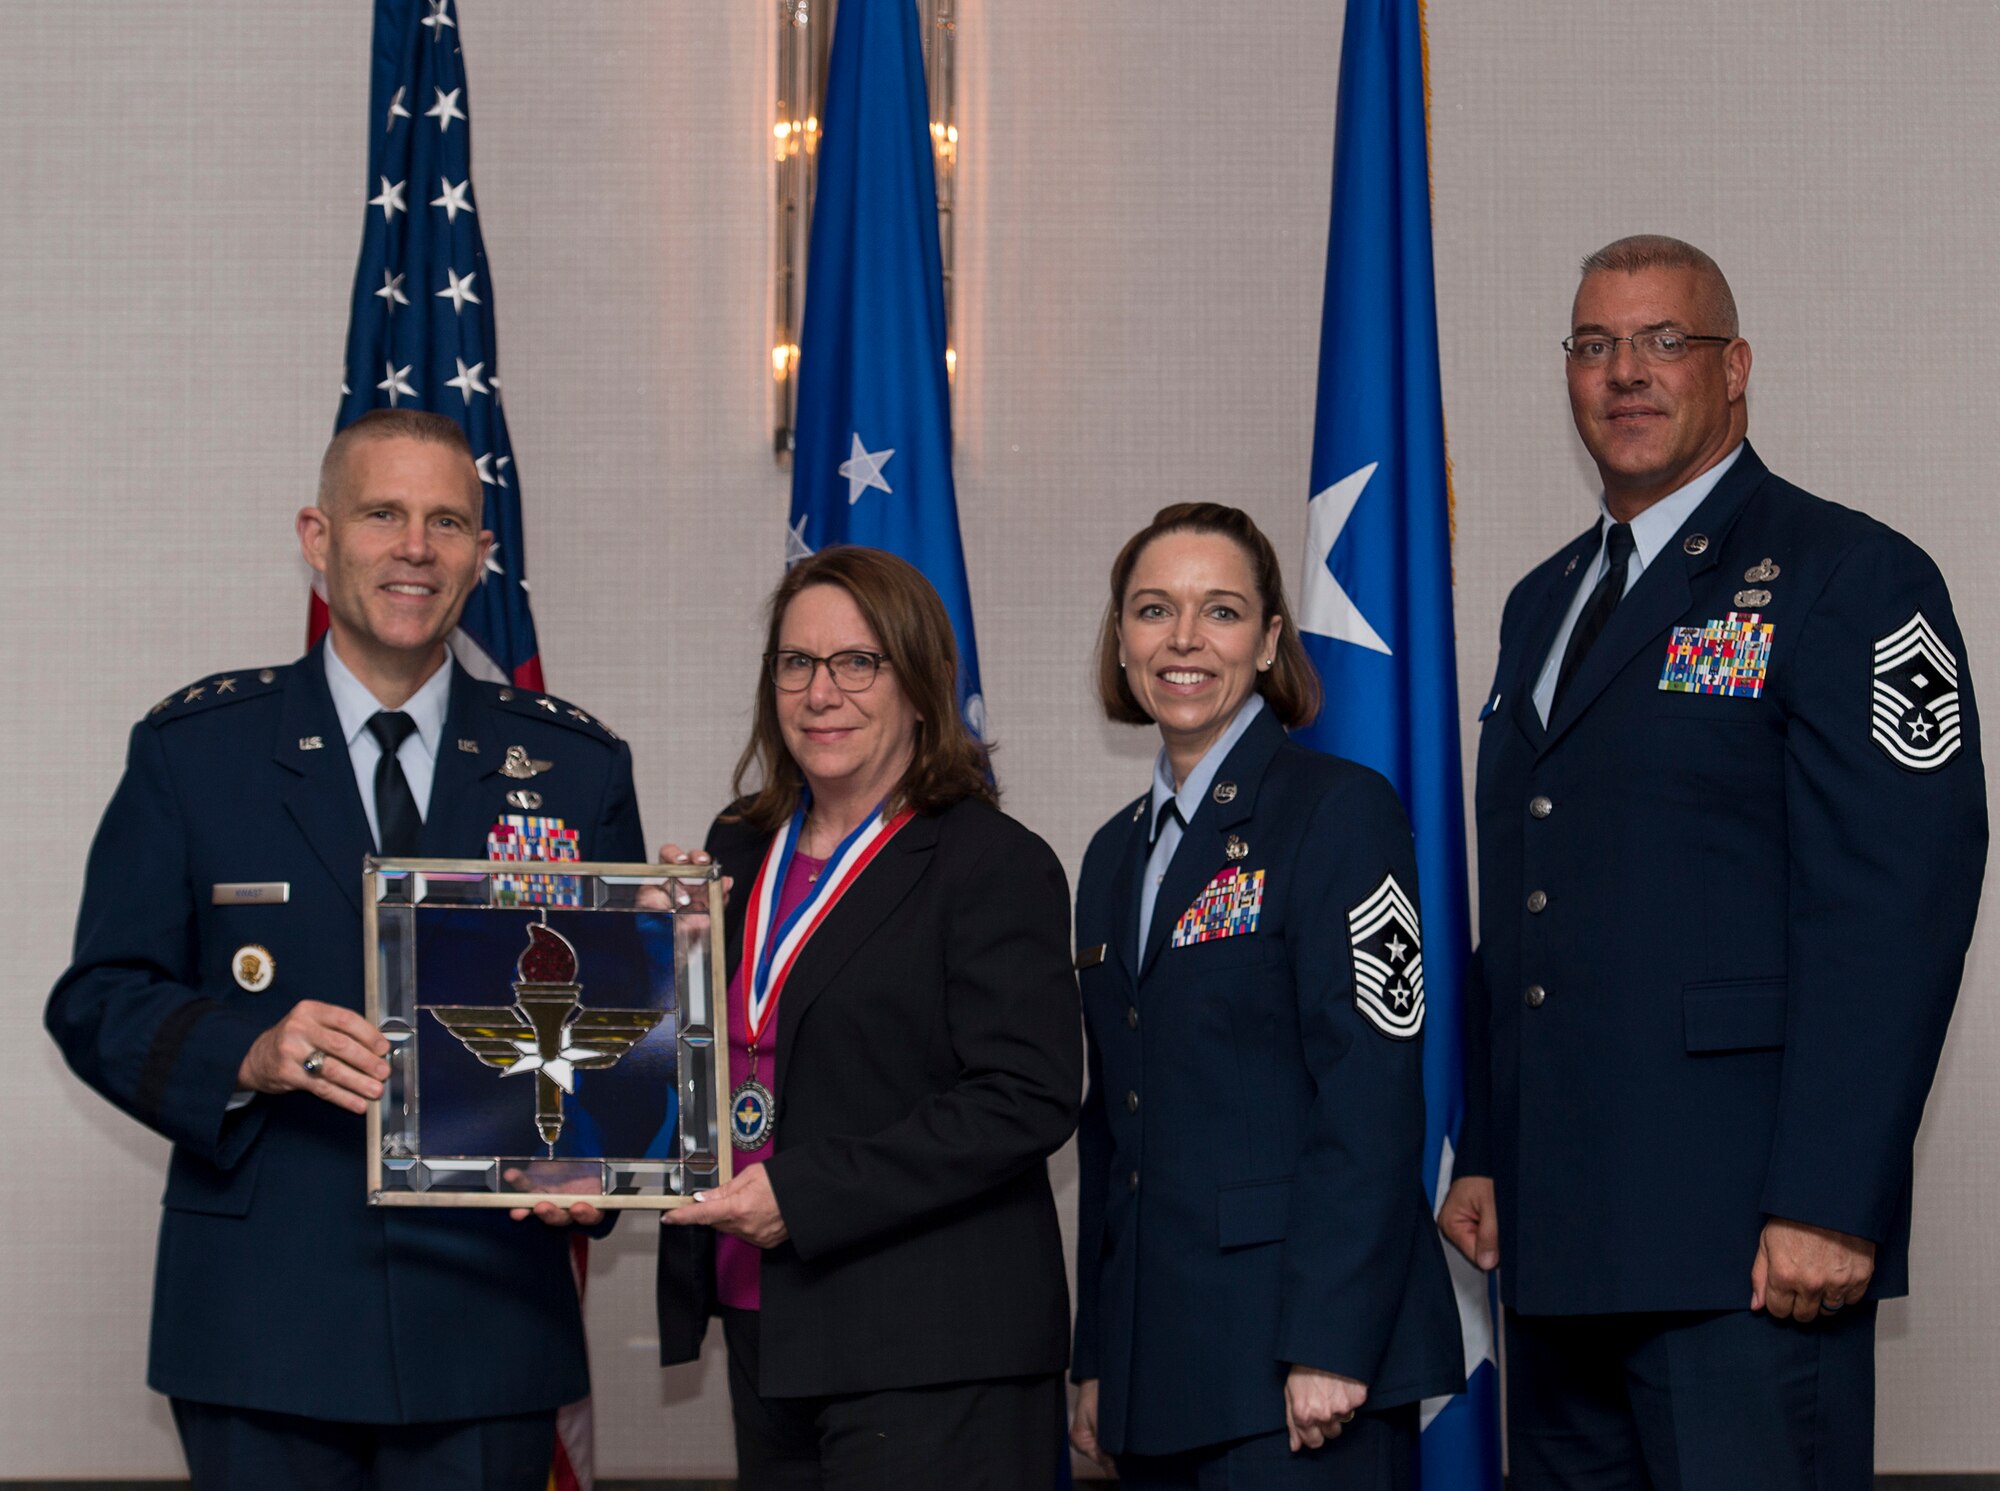 Brenda S. Sizemore, Director of Business Operations for the 17th Contracting Squadron at Goodfellow Air Force Base, Texas, receives the 2017 Supervisory Civilian of the Year Award from Lt. Gen. Steve Kwast, Commander of AETC, during the AETC 12 Outstanding Airmen of the Year Awards banquet Feb. 22, 2018 in Orlando, Fla. Sizemore earned Best AETC Contracting Civilian two years in a row, led AETC’s best base-level cost reduction program, saving the Air Force $13 million over six years, as well as managed the Contracting Officer Warrant Program, helping to alleviate squadron buy shortfall while also increasing contract award production by 27 percent. (U.S. Air Force photo by Staff Sgt. Kenneth W. Norman)